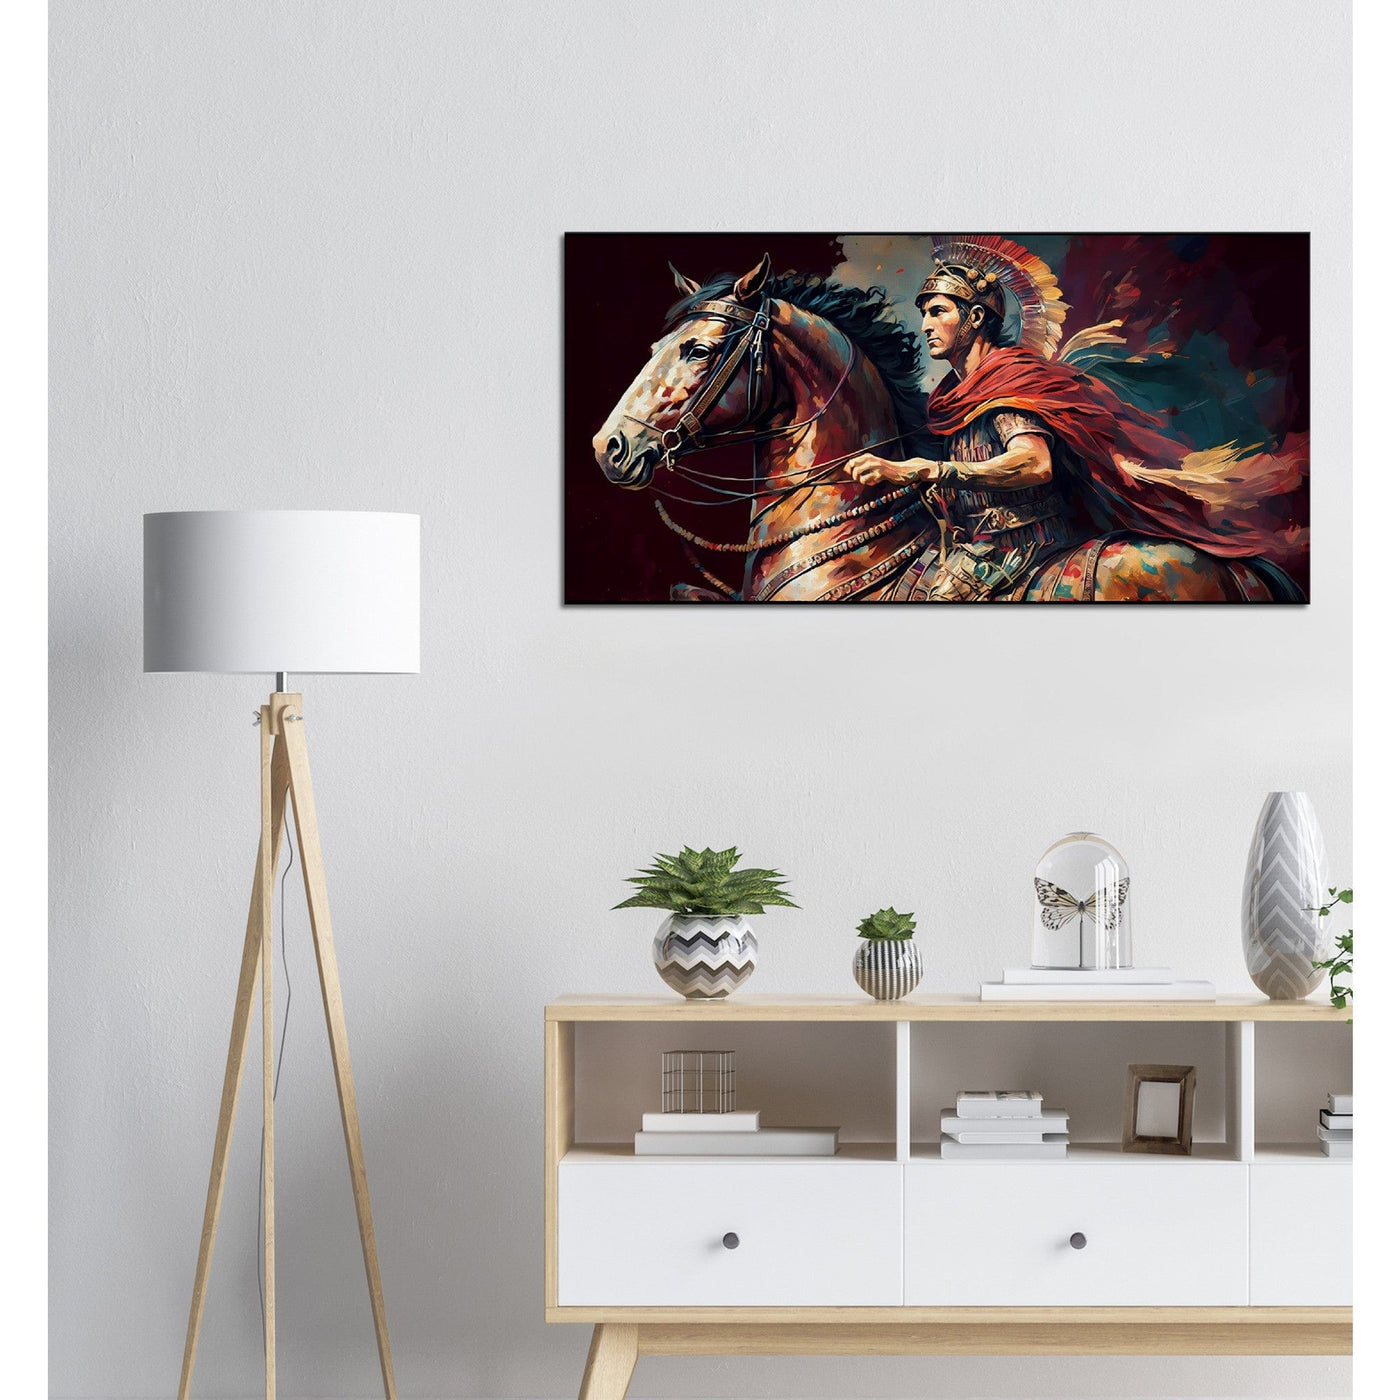 Augustus: The Architect of Rome - Oil Painting Printed Canvas. 50X100.